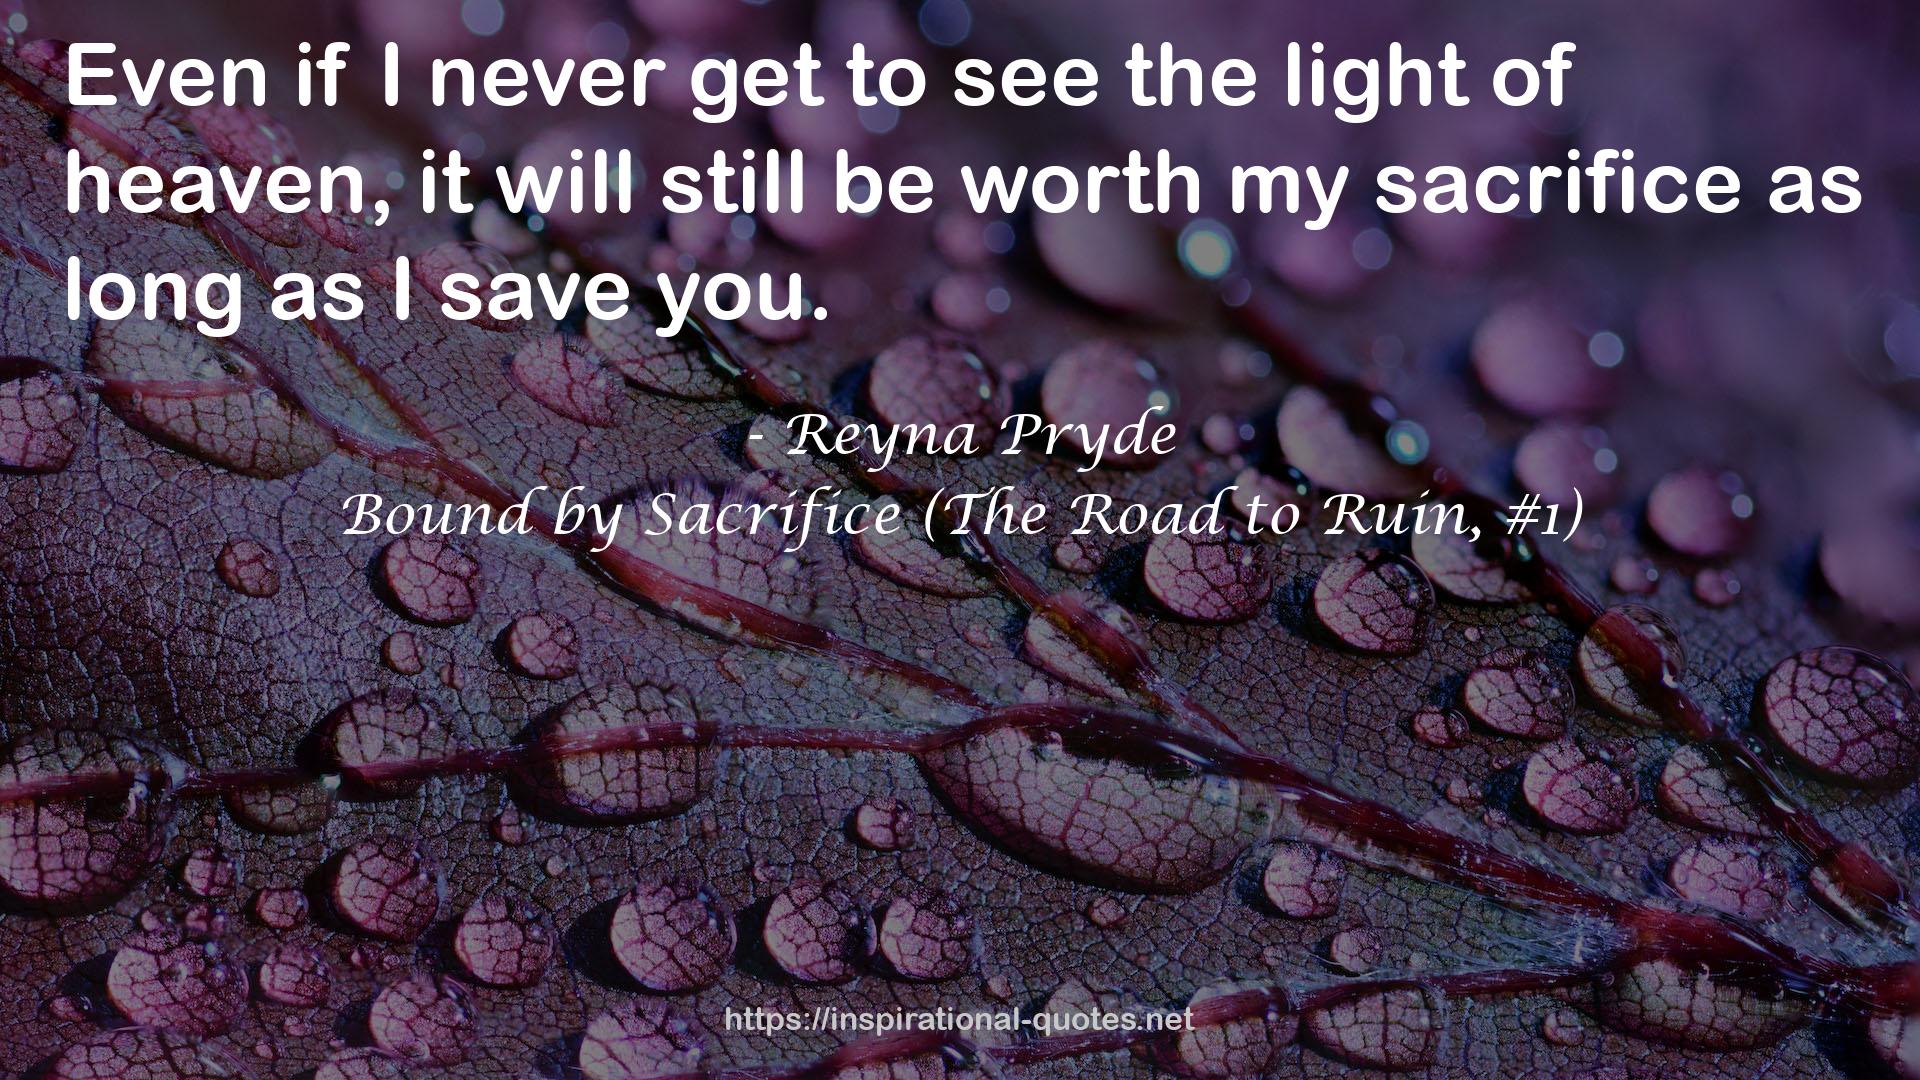 Bound by Sacrifice (The Road to Ruin, #1) QUOTES